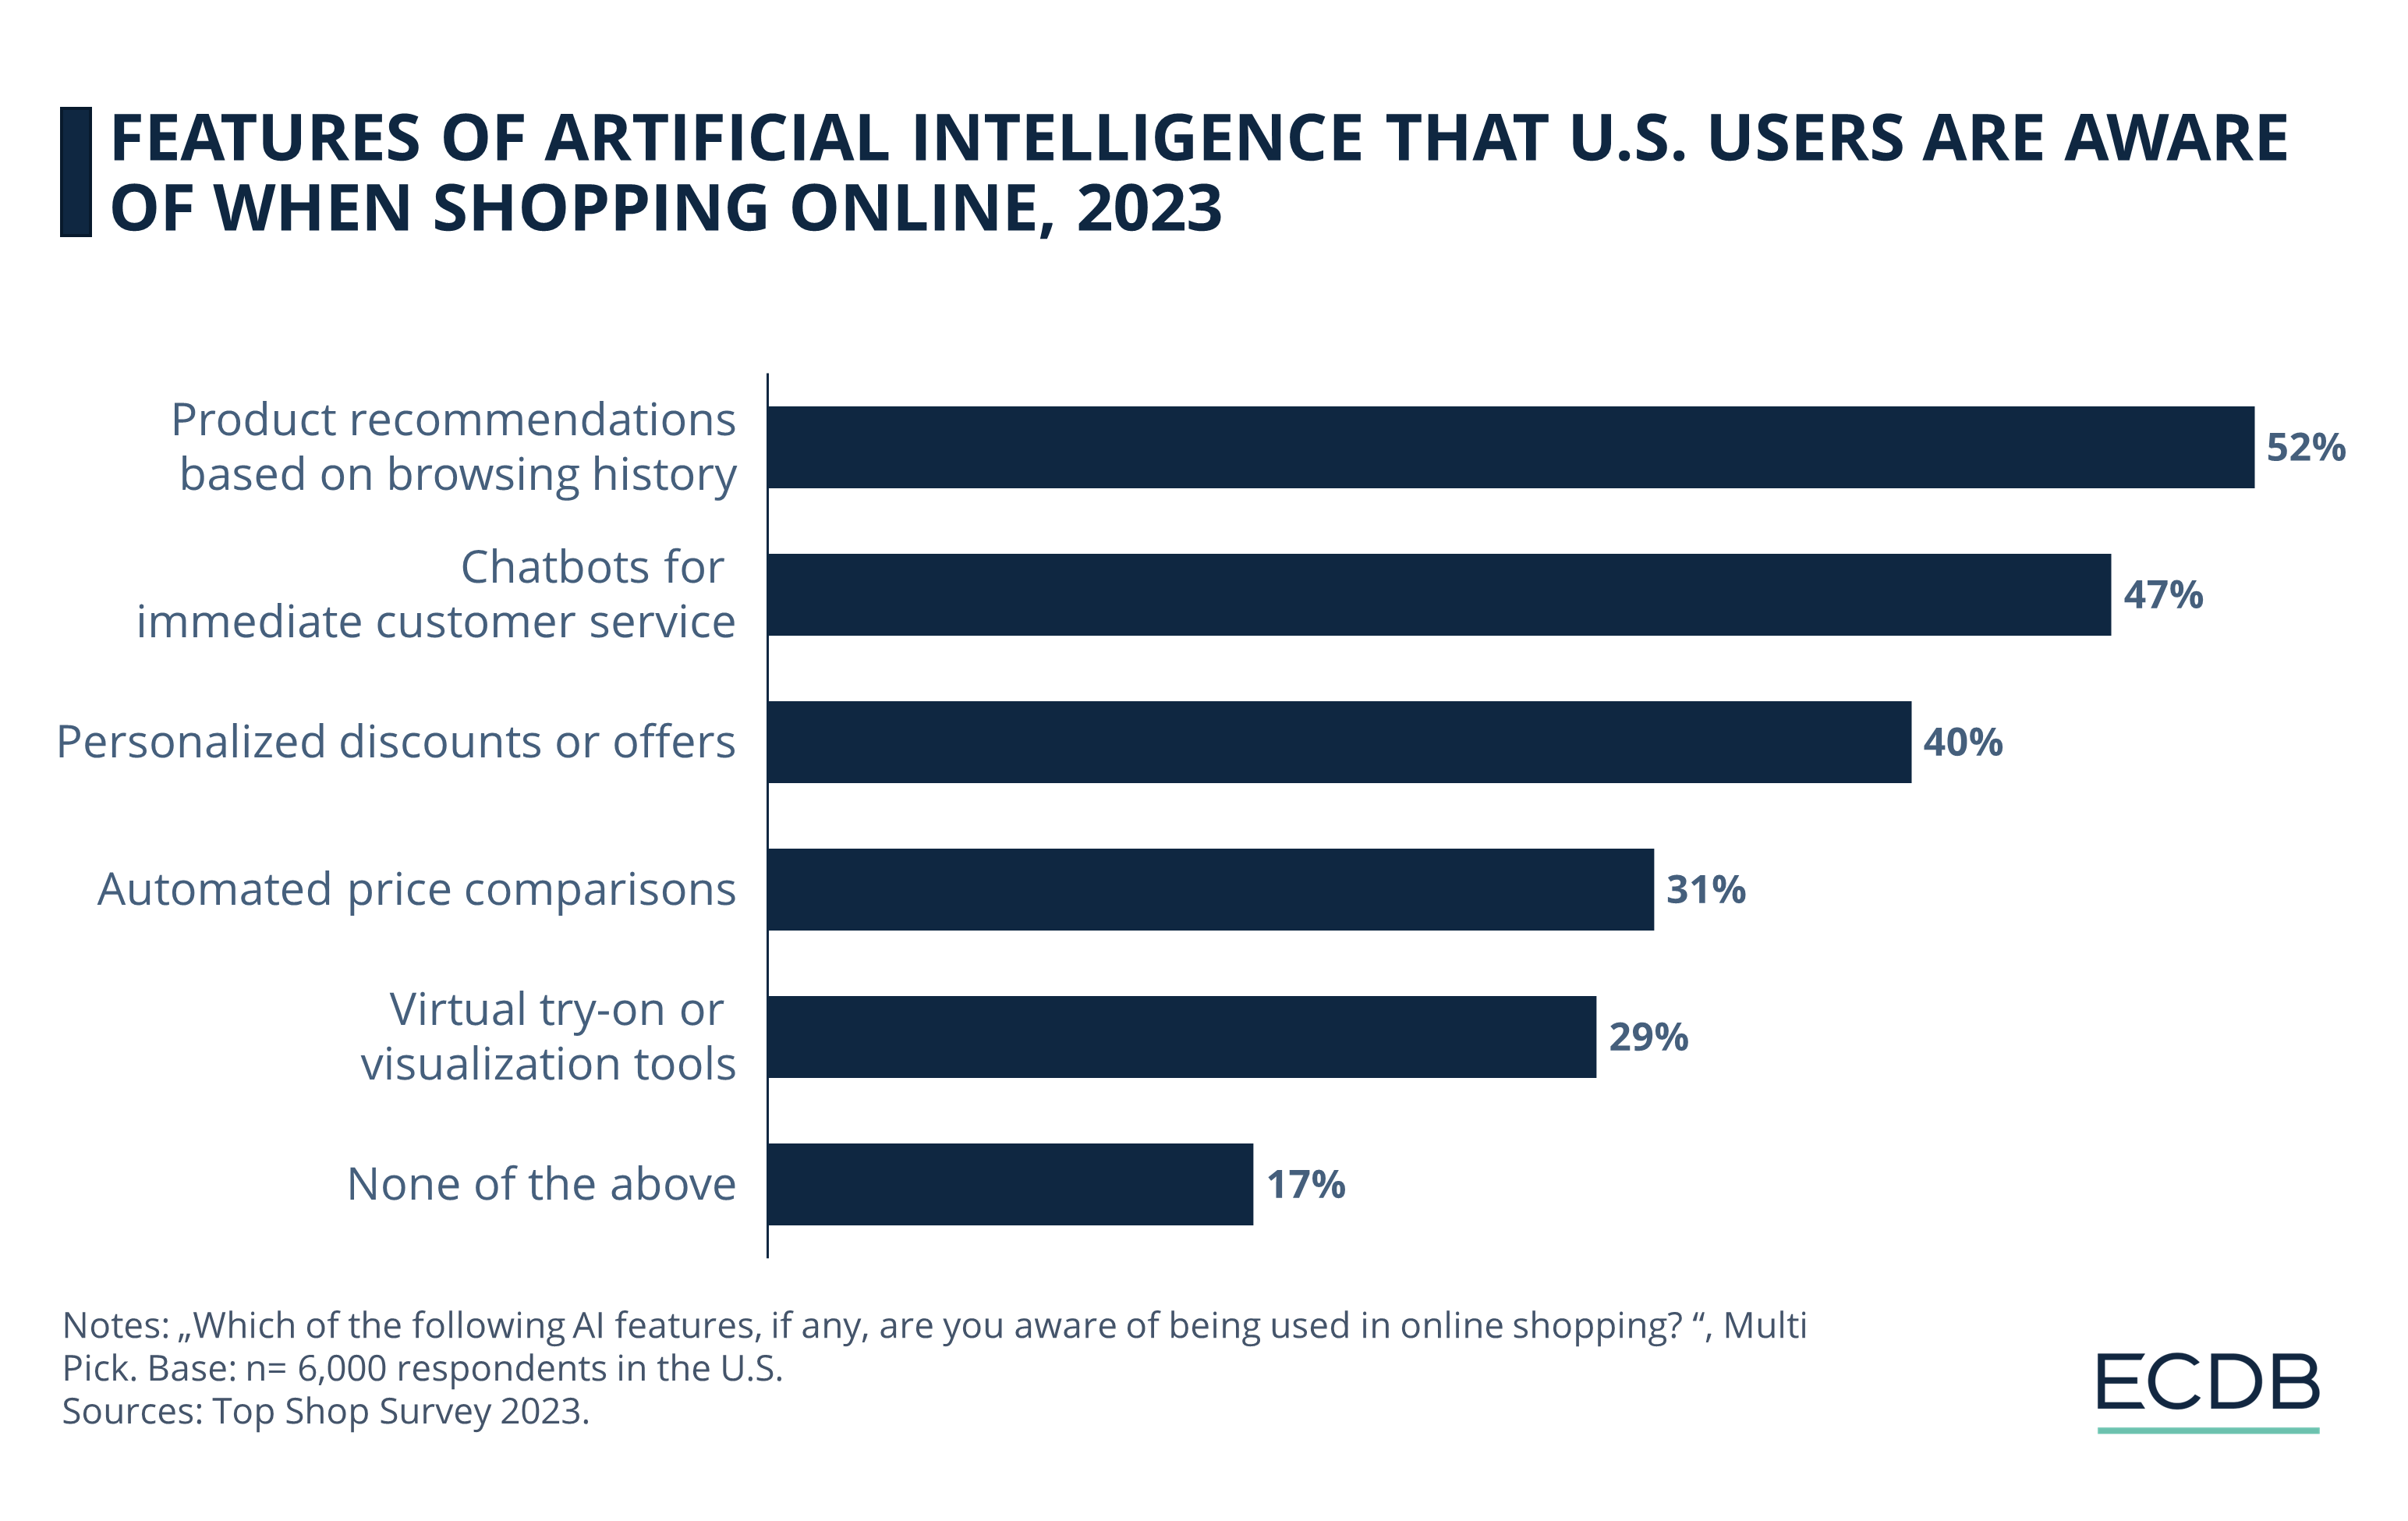 Features of AI That U.S. Users Are Aware Of When Shopping Online, 2023